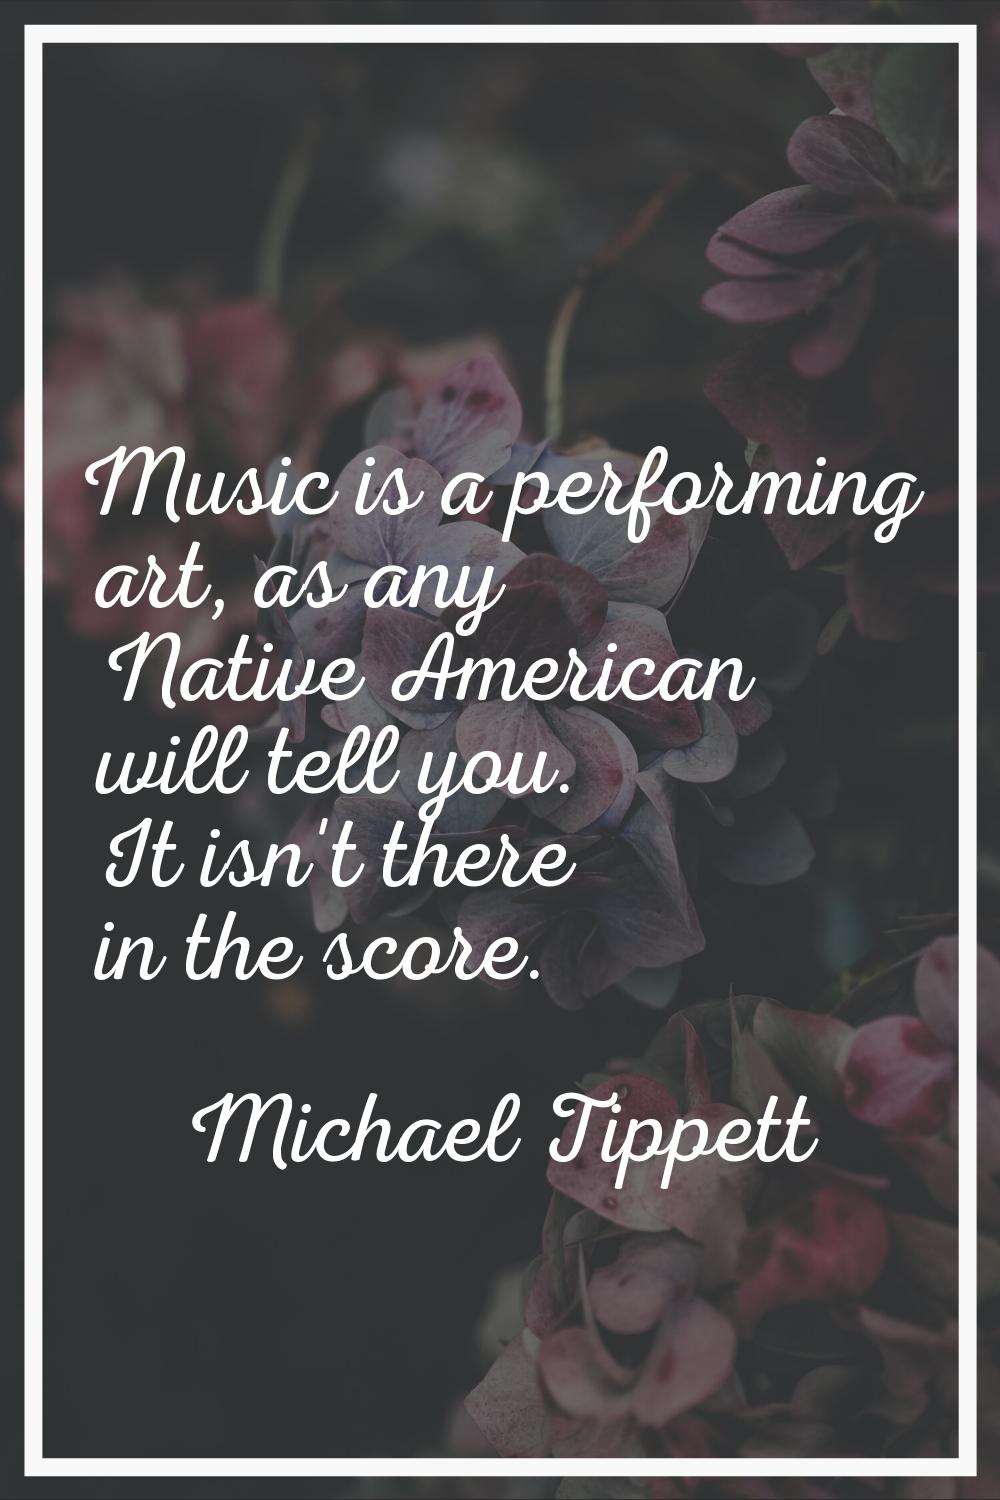 Music is a performing art, as any Native American will tell you. It isn't there in the score.